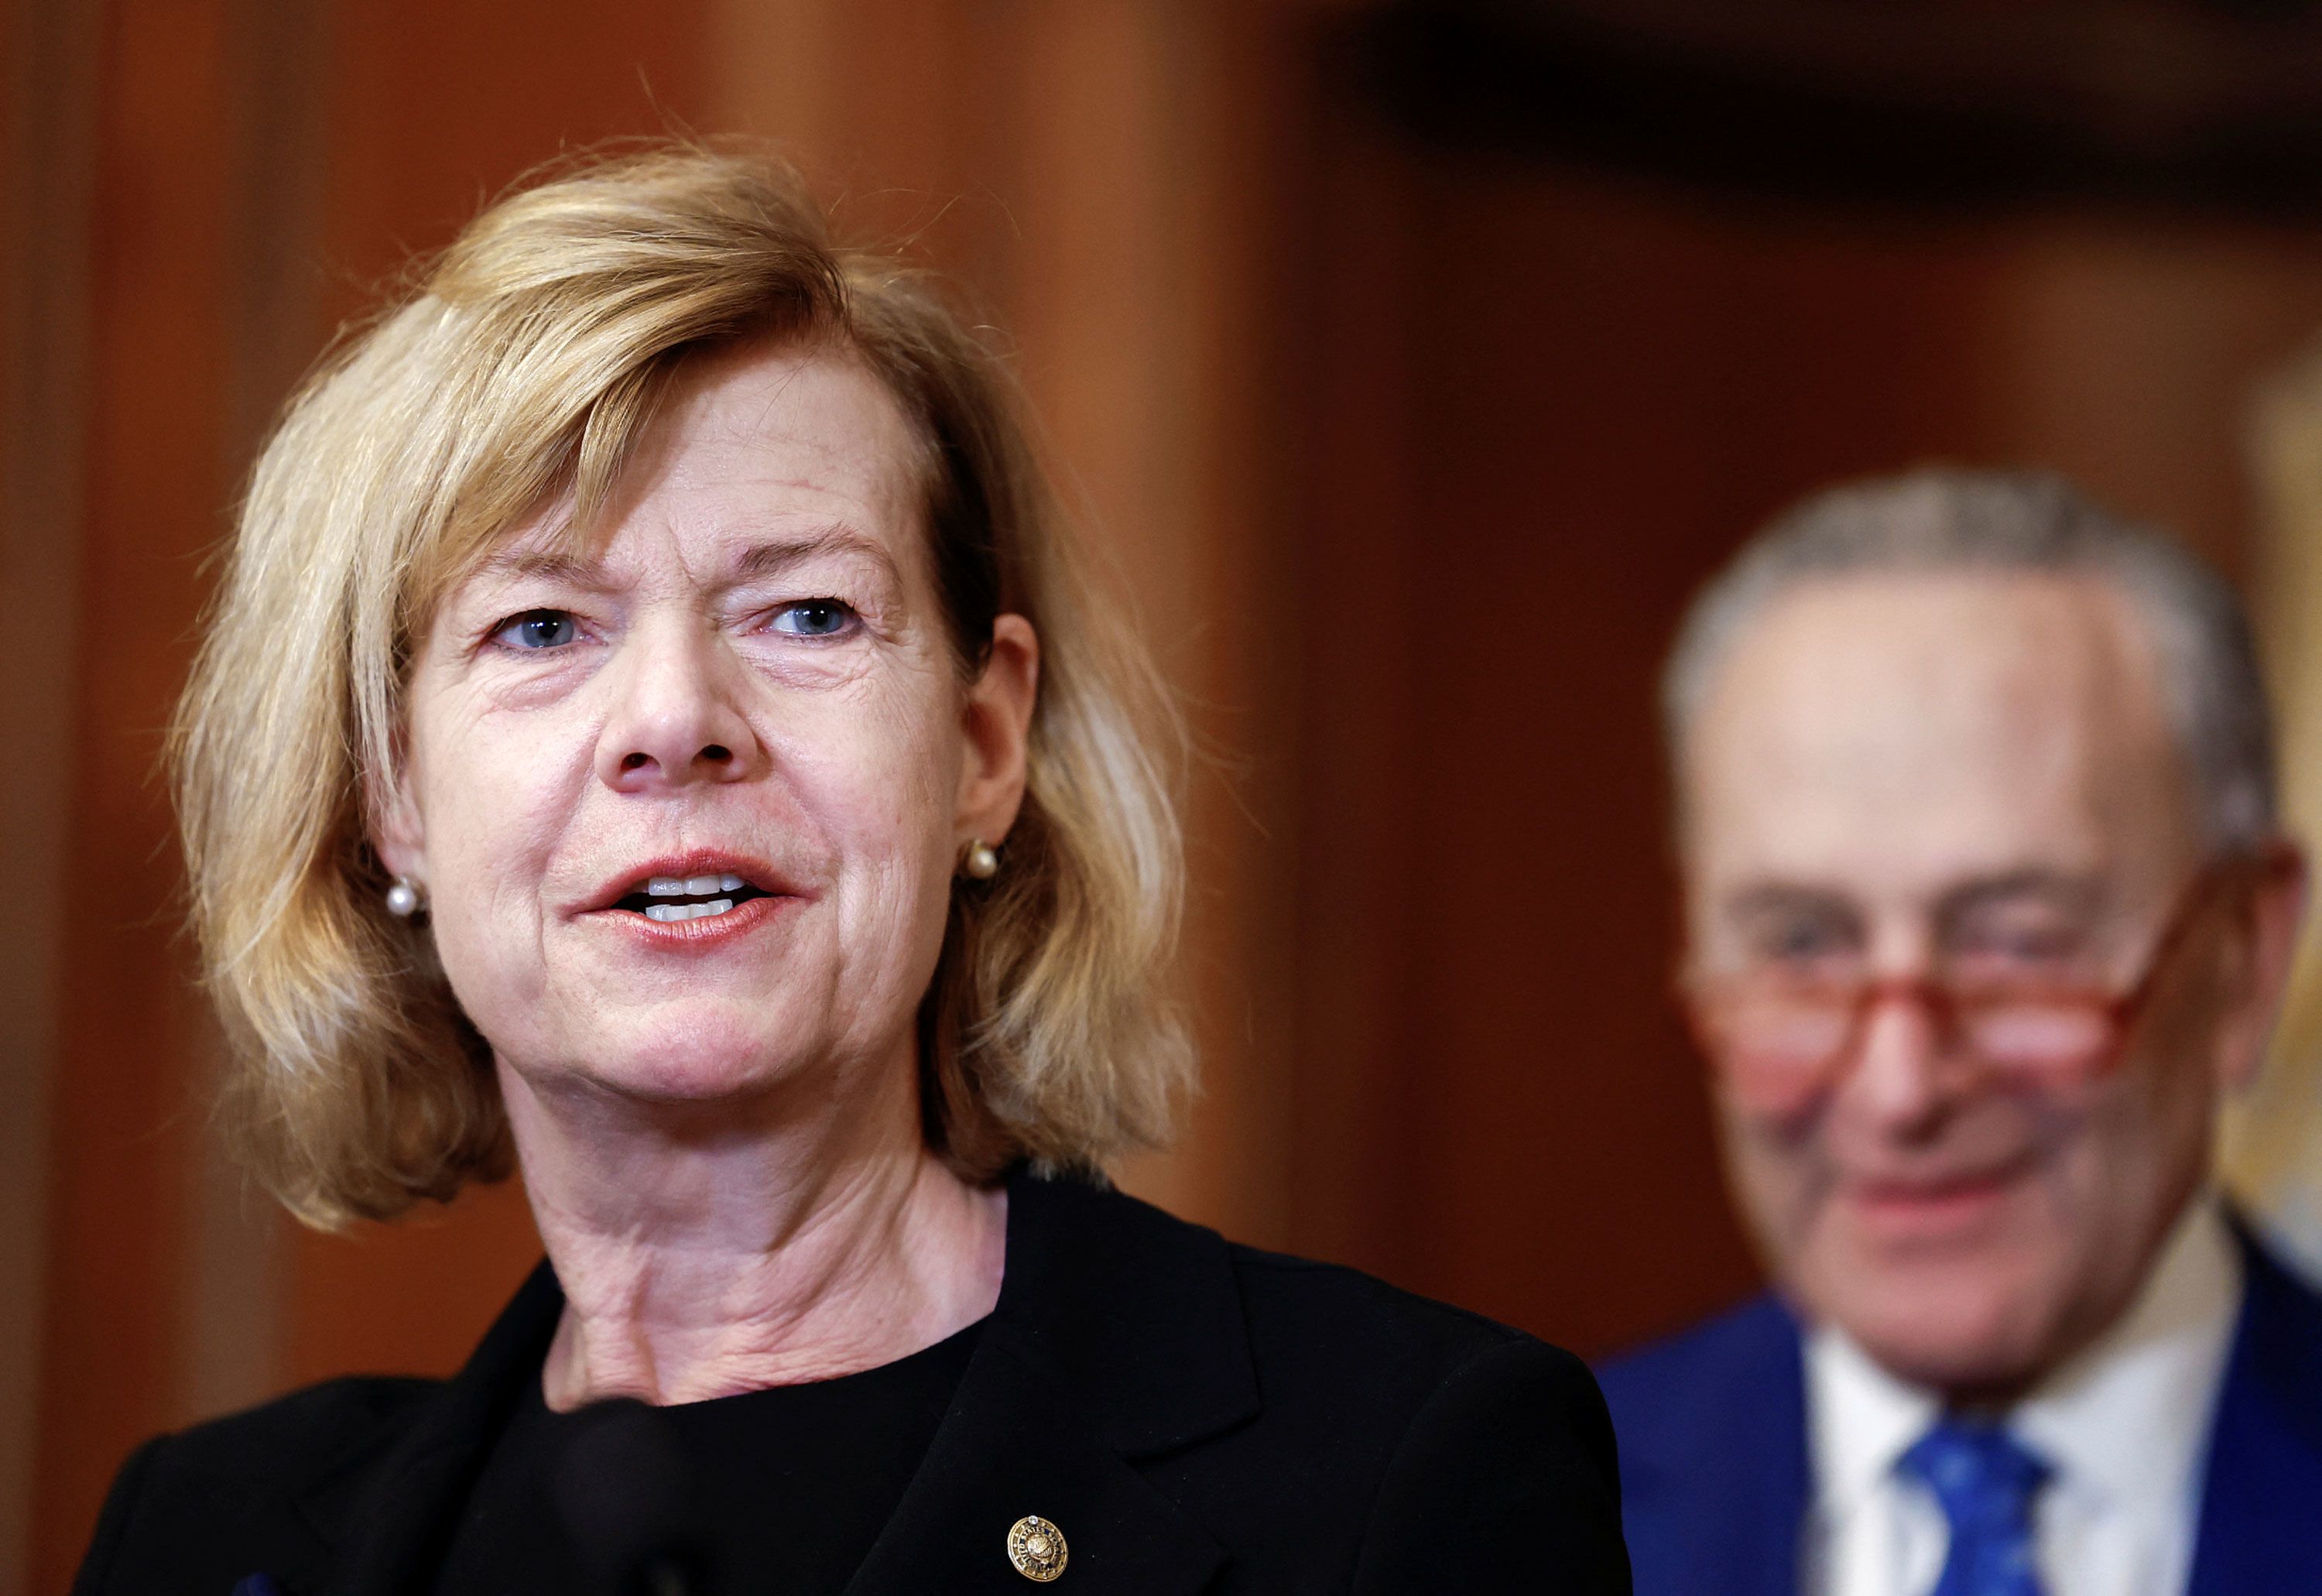 U.S. Senator Tammy Baldwin (D-WI) speaks ahead of the signing of "The Respect for Marriage Act" during a bill enrolment ceremony on Capitol Hill, in Washington, U.S., December 8, 2022. REUTERS/Evelyn Hockstein